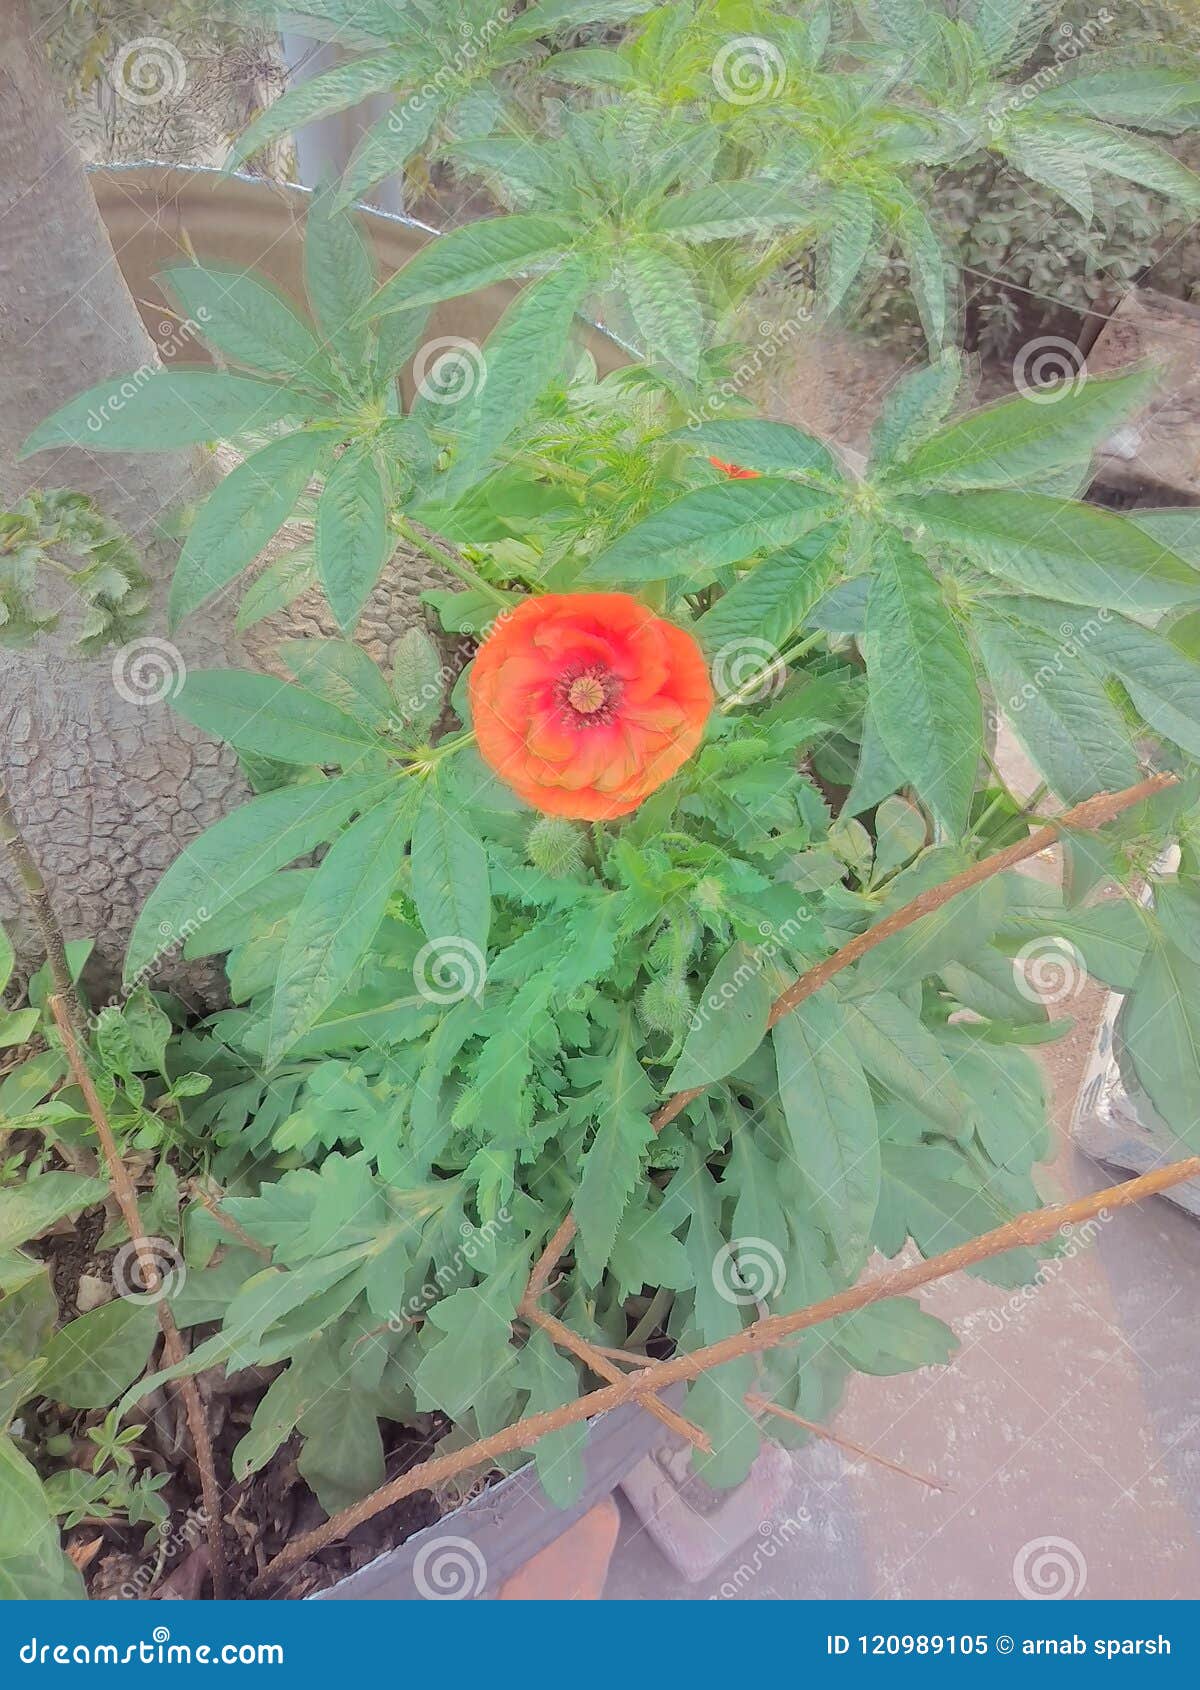 beautiful flower plant at home in india stock image - image of